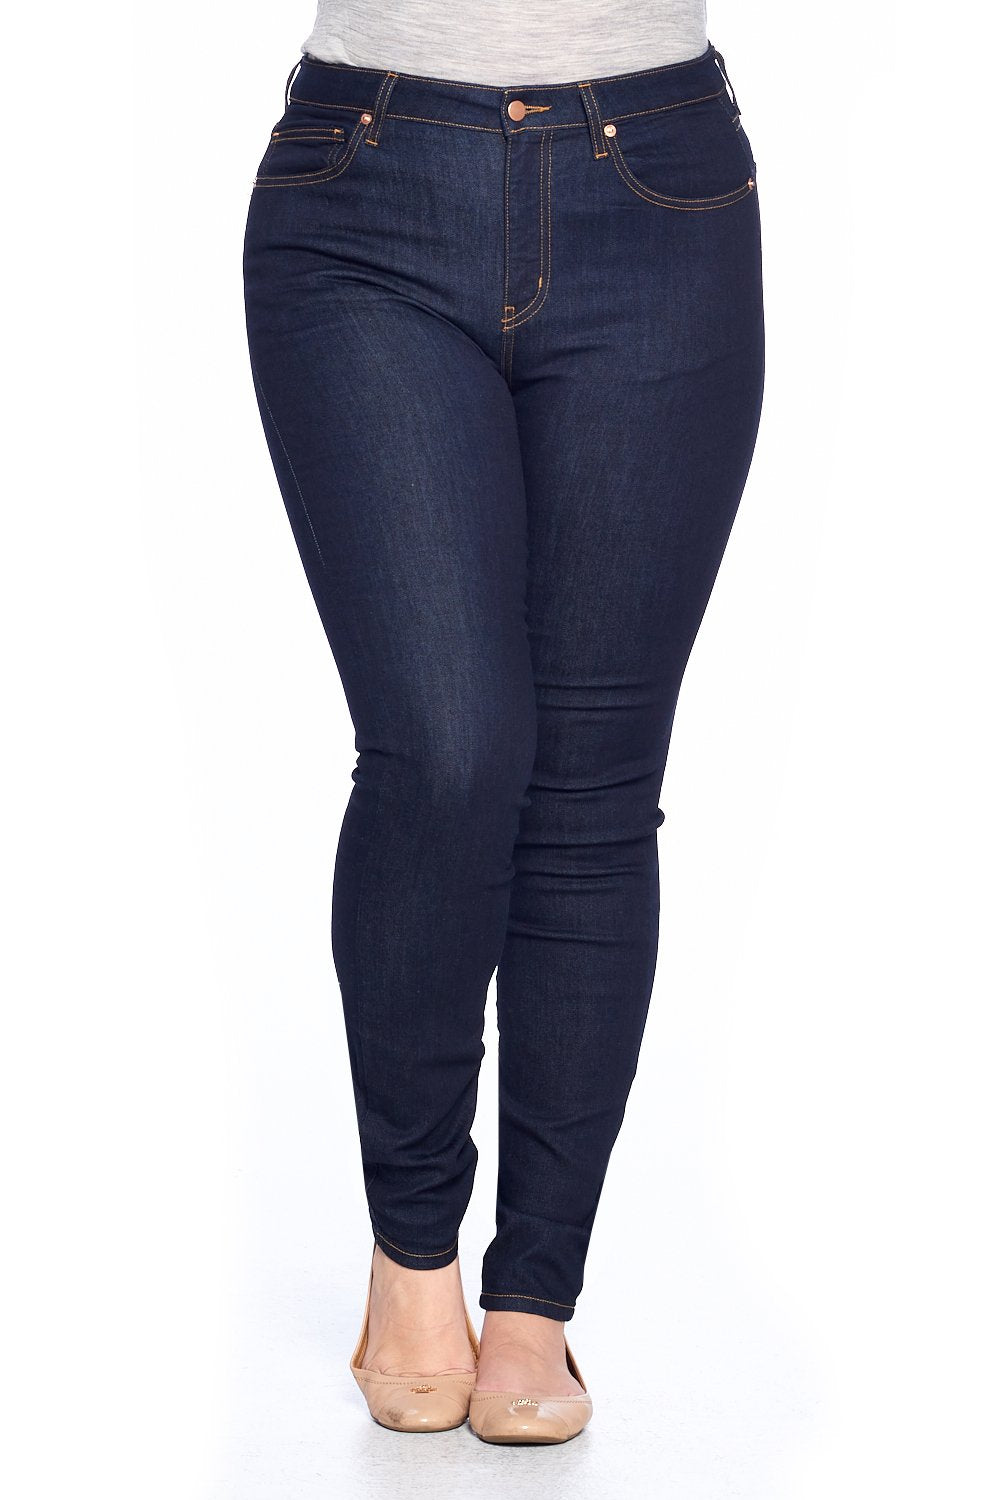 Women high waist one button skinny fit jeans